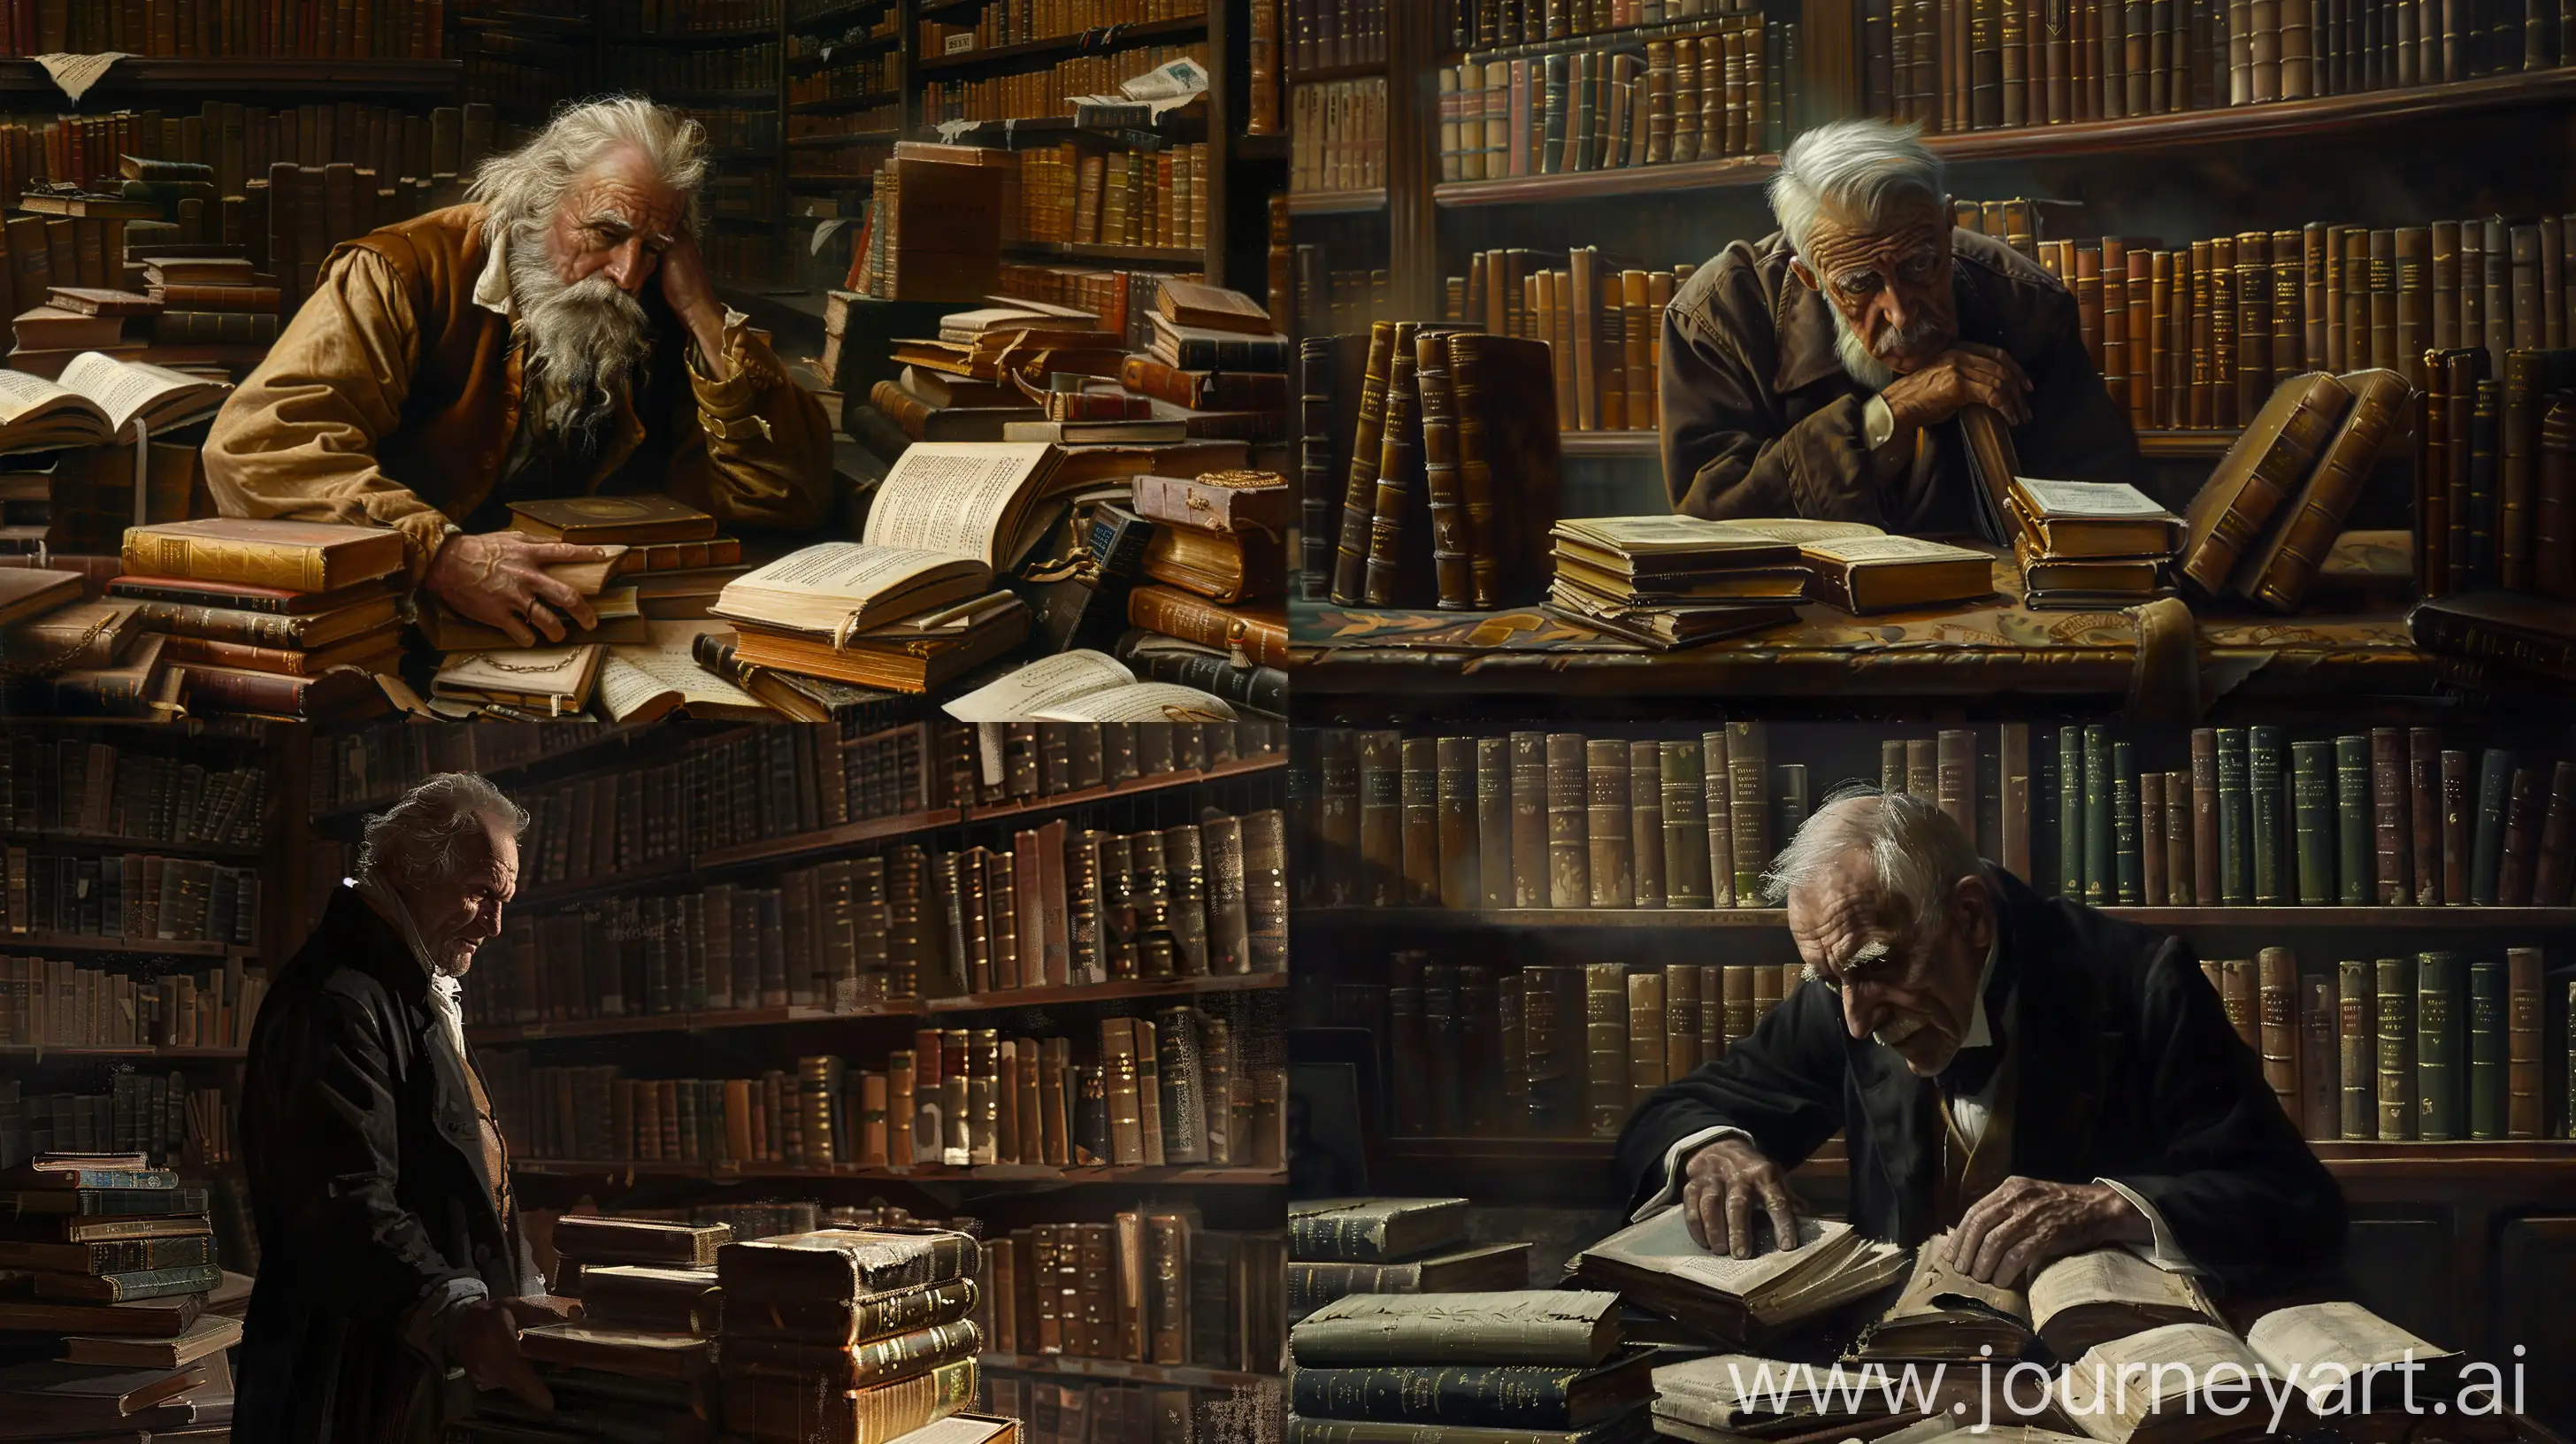 Junius Brutus Stearns style, portrait of a thoughtful antiquarian surrounded by ancient books, dimly lit historical library setting, 19th-century attire, reflective, somber ambiance, muted earth tones, oil on canvas texture, with a touch of American Neoclassicism --ar 16:9 --v 6